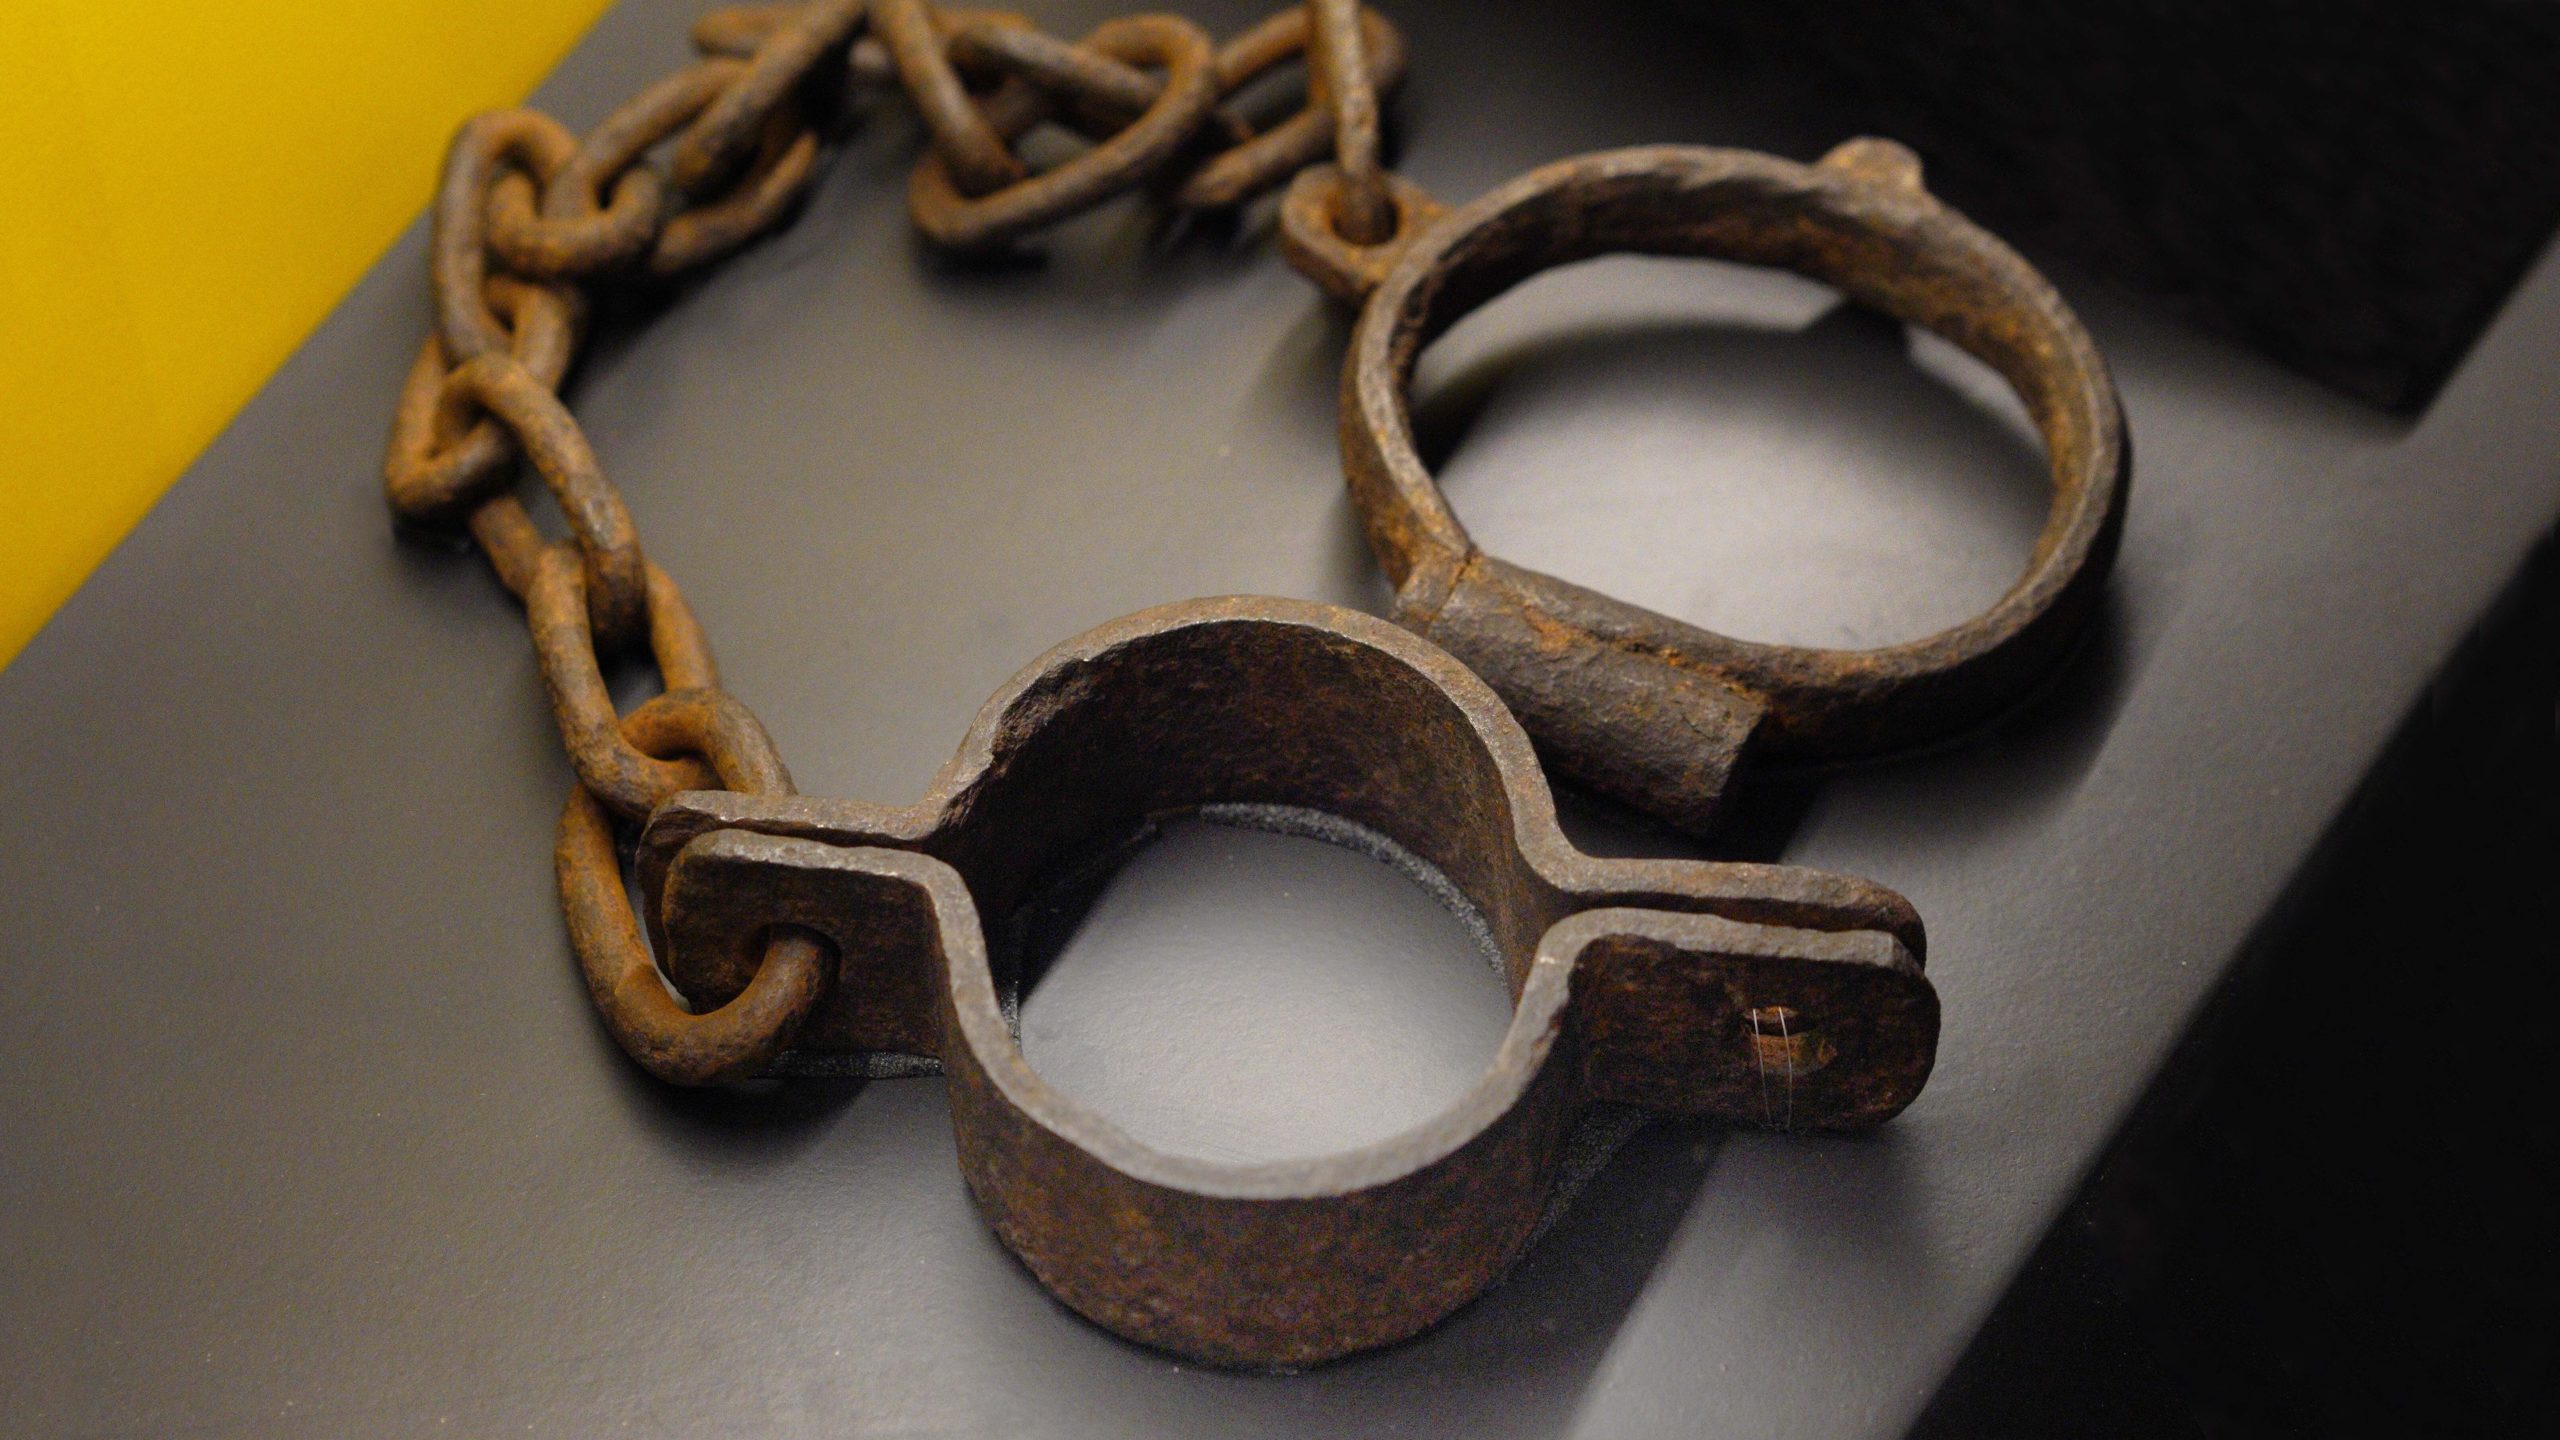 Leg shackles used to restrict the movement of enslaved people, 19th century, iron (Museum of the Civil War, Richmond; photo: Steven Zucker, CC BY-NC-SA 2.0)